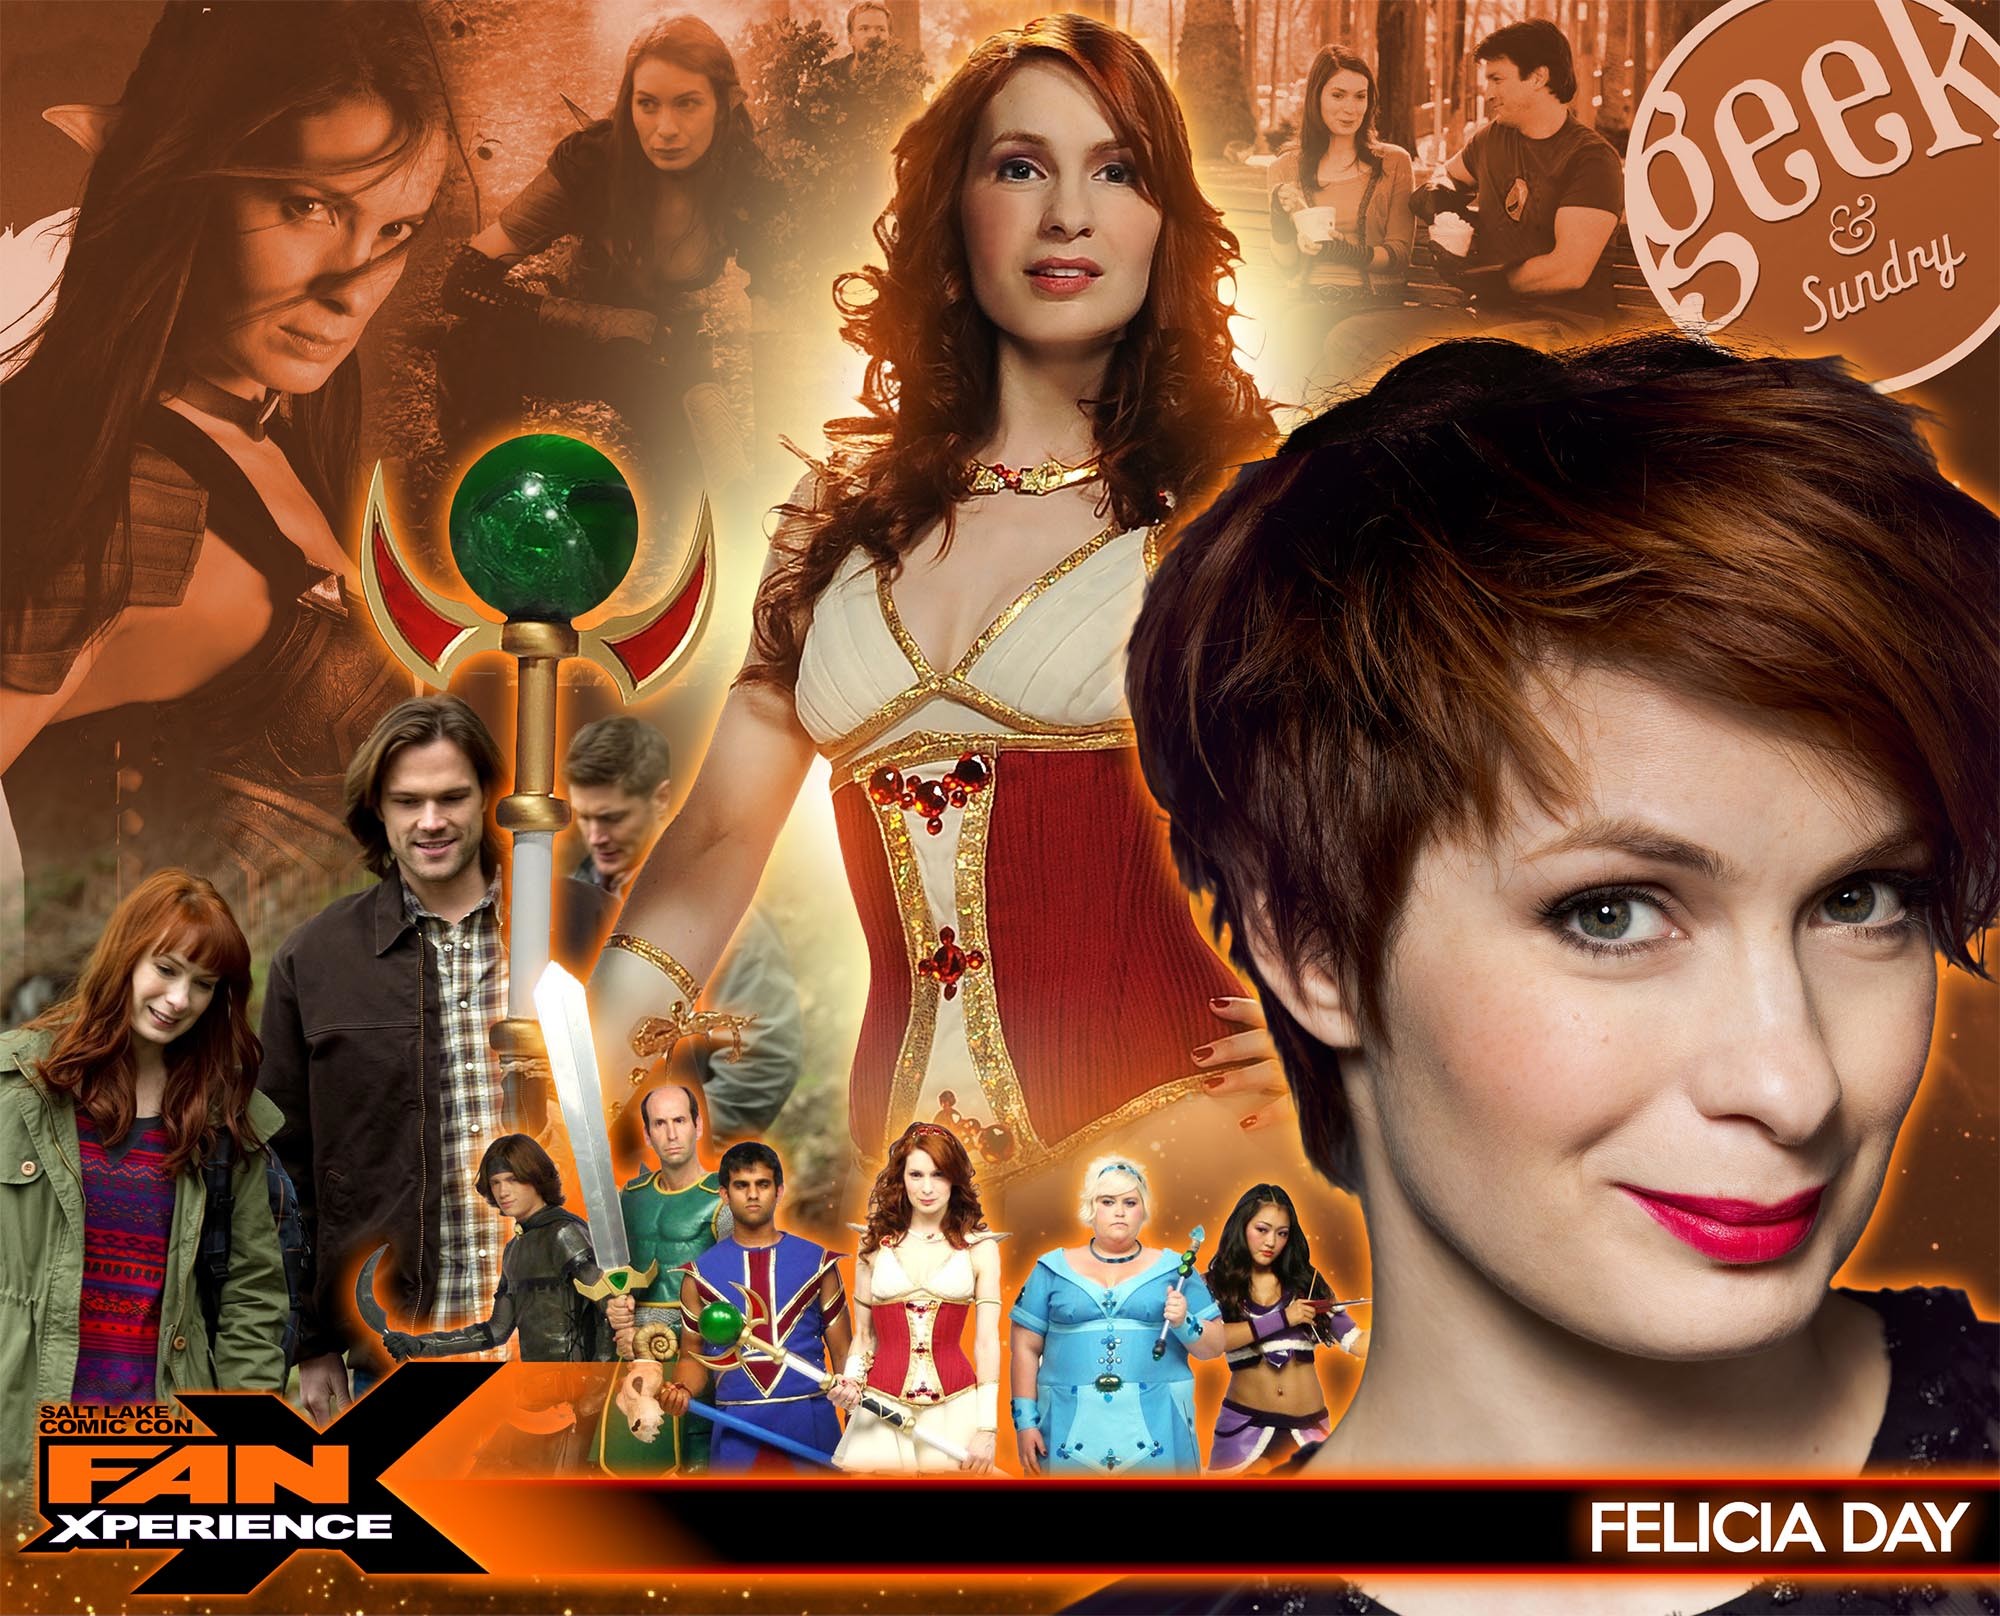 Please welcome Felicia Day to FanXperience 2015 Salt Lake Comic Con September 21 23, 2017